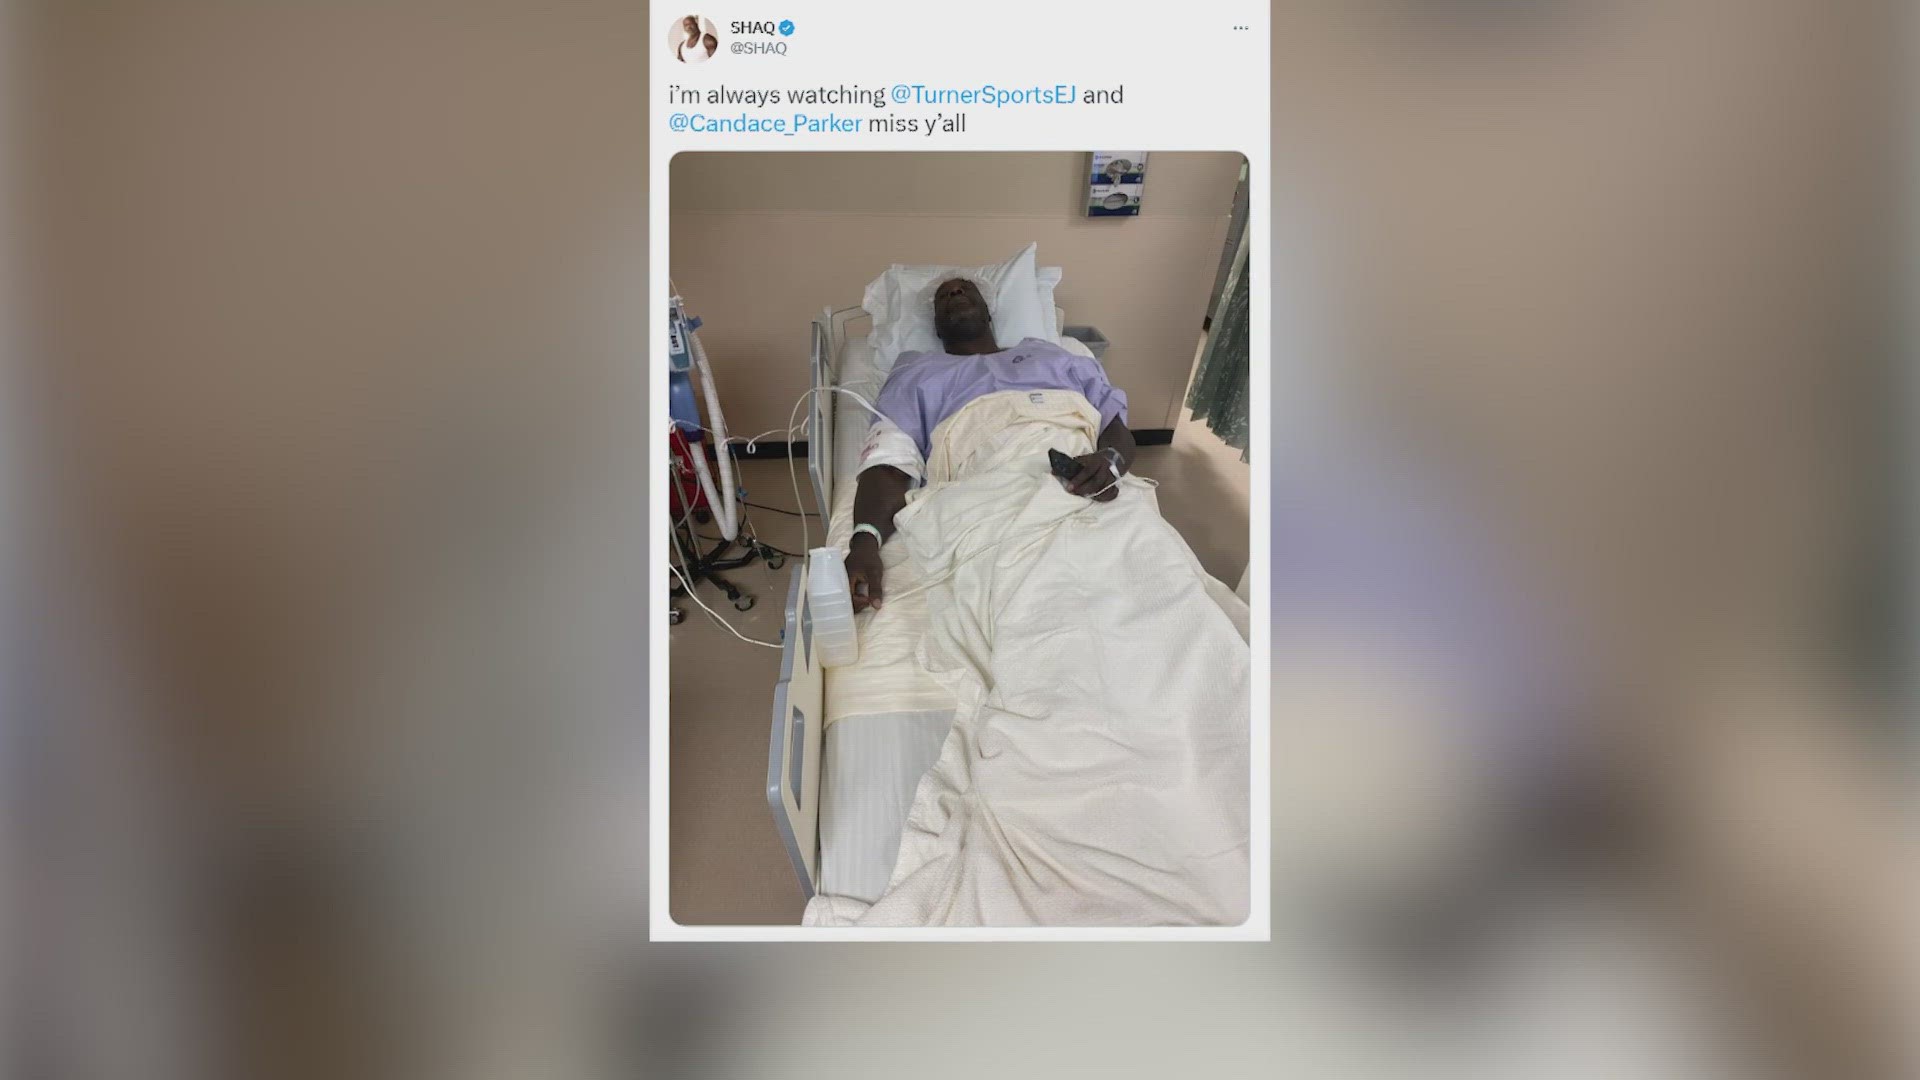 People expressed concern after Shaq posted a picture of him in a hospital bed.